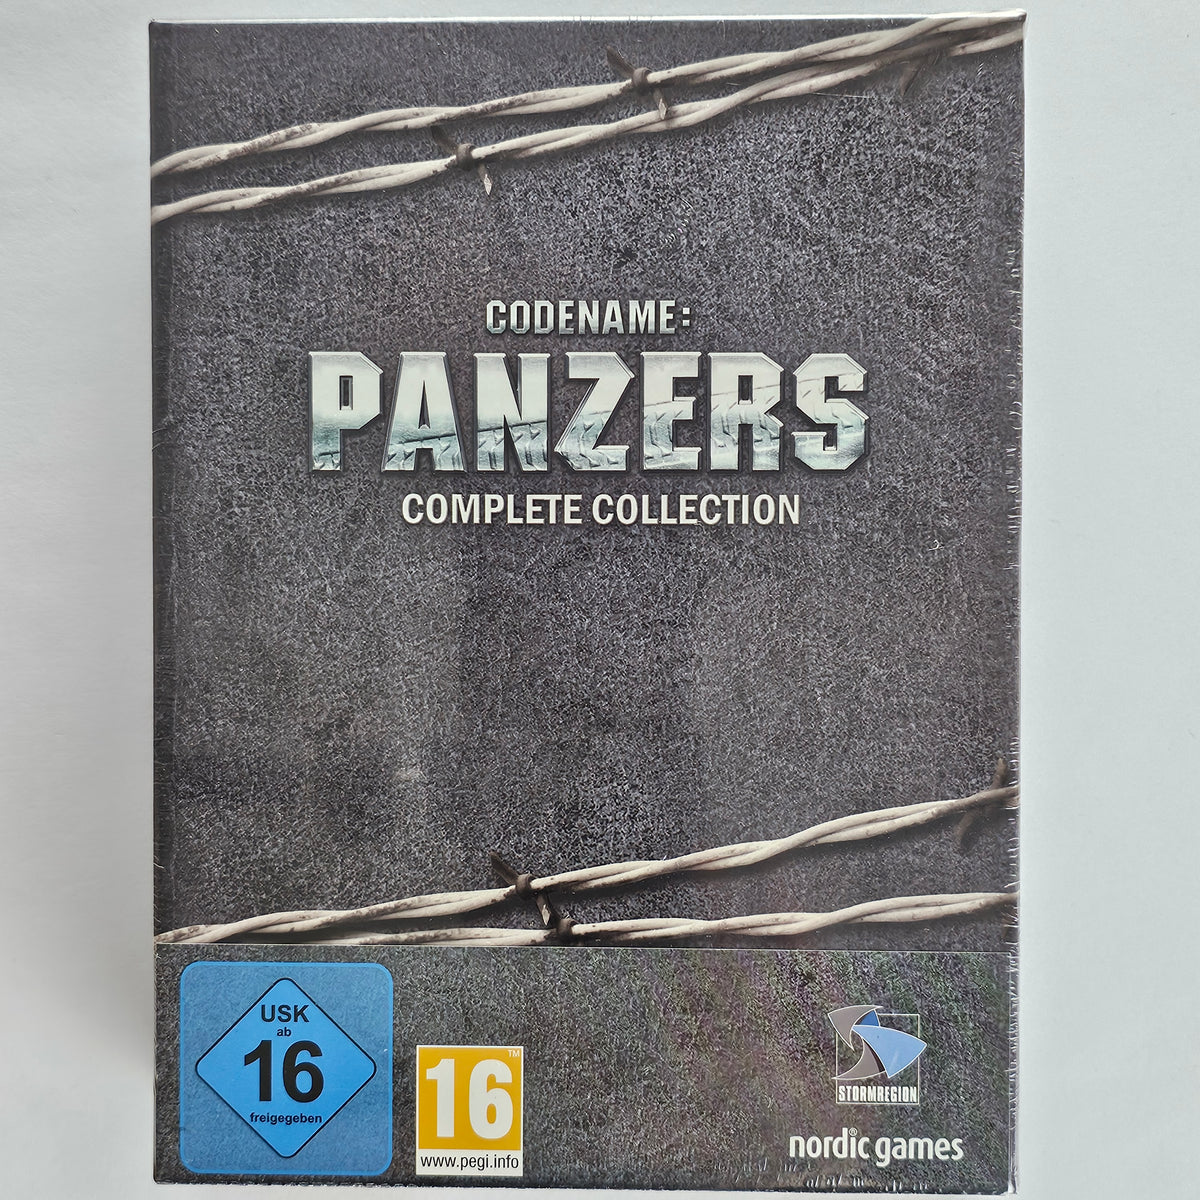 Codename Panzers Complete Collect. [PC]